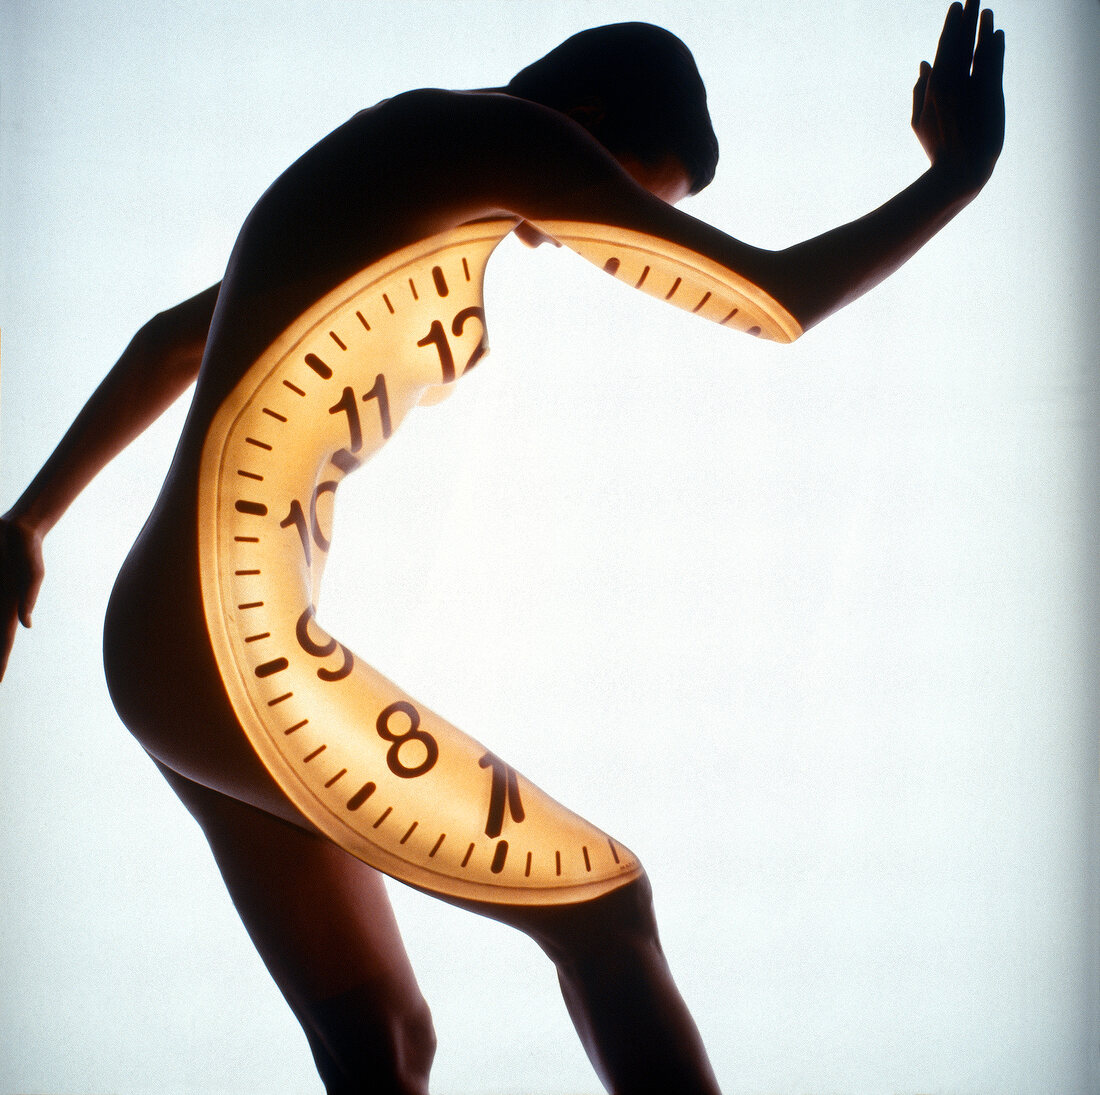 Nude woman with projector clock dial on her body, bending